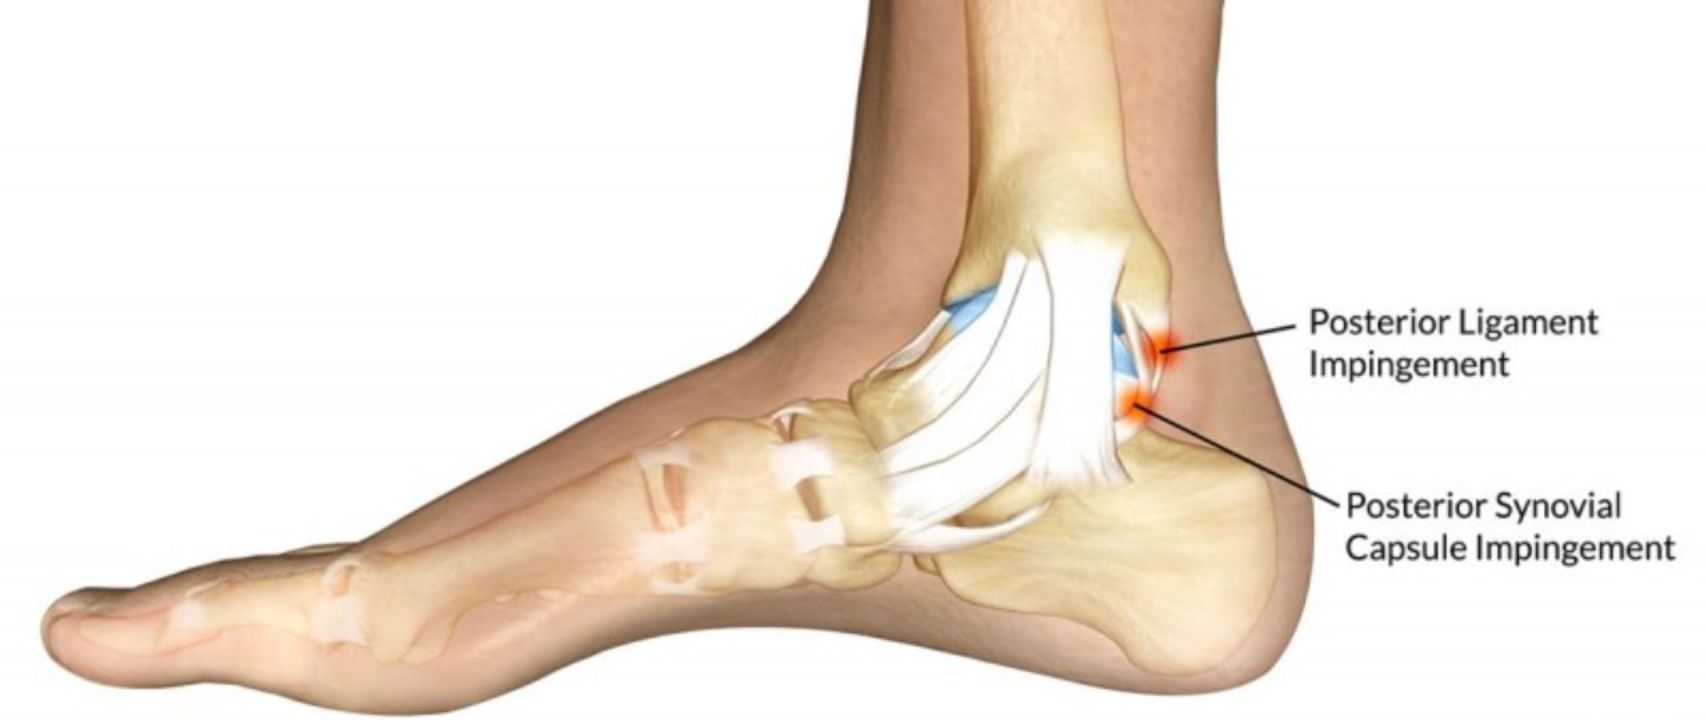 Treatment Options for Posterior Ankle Impingement